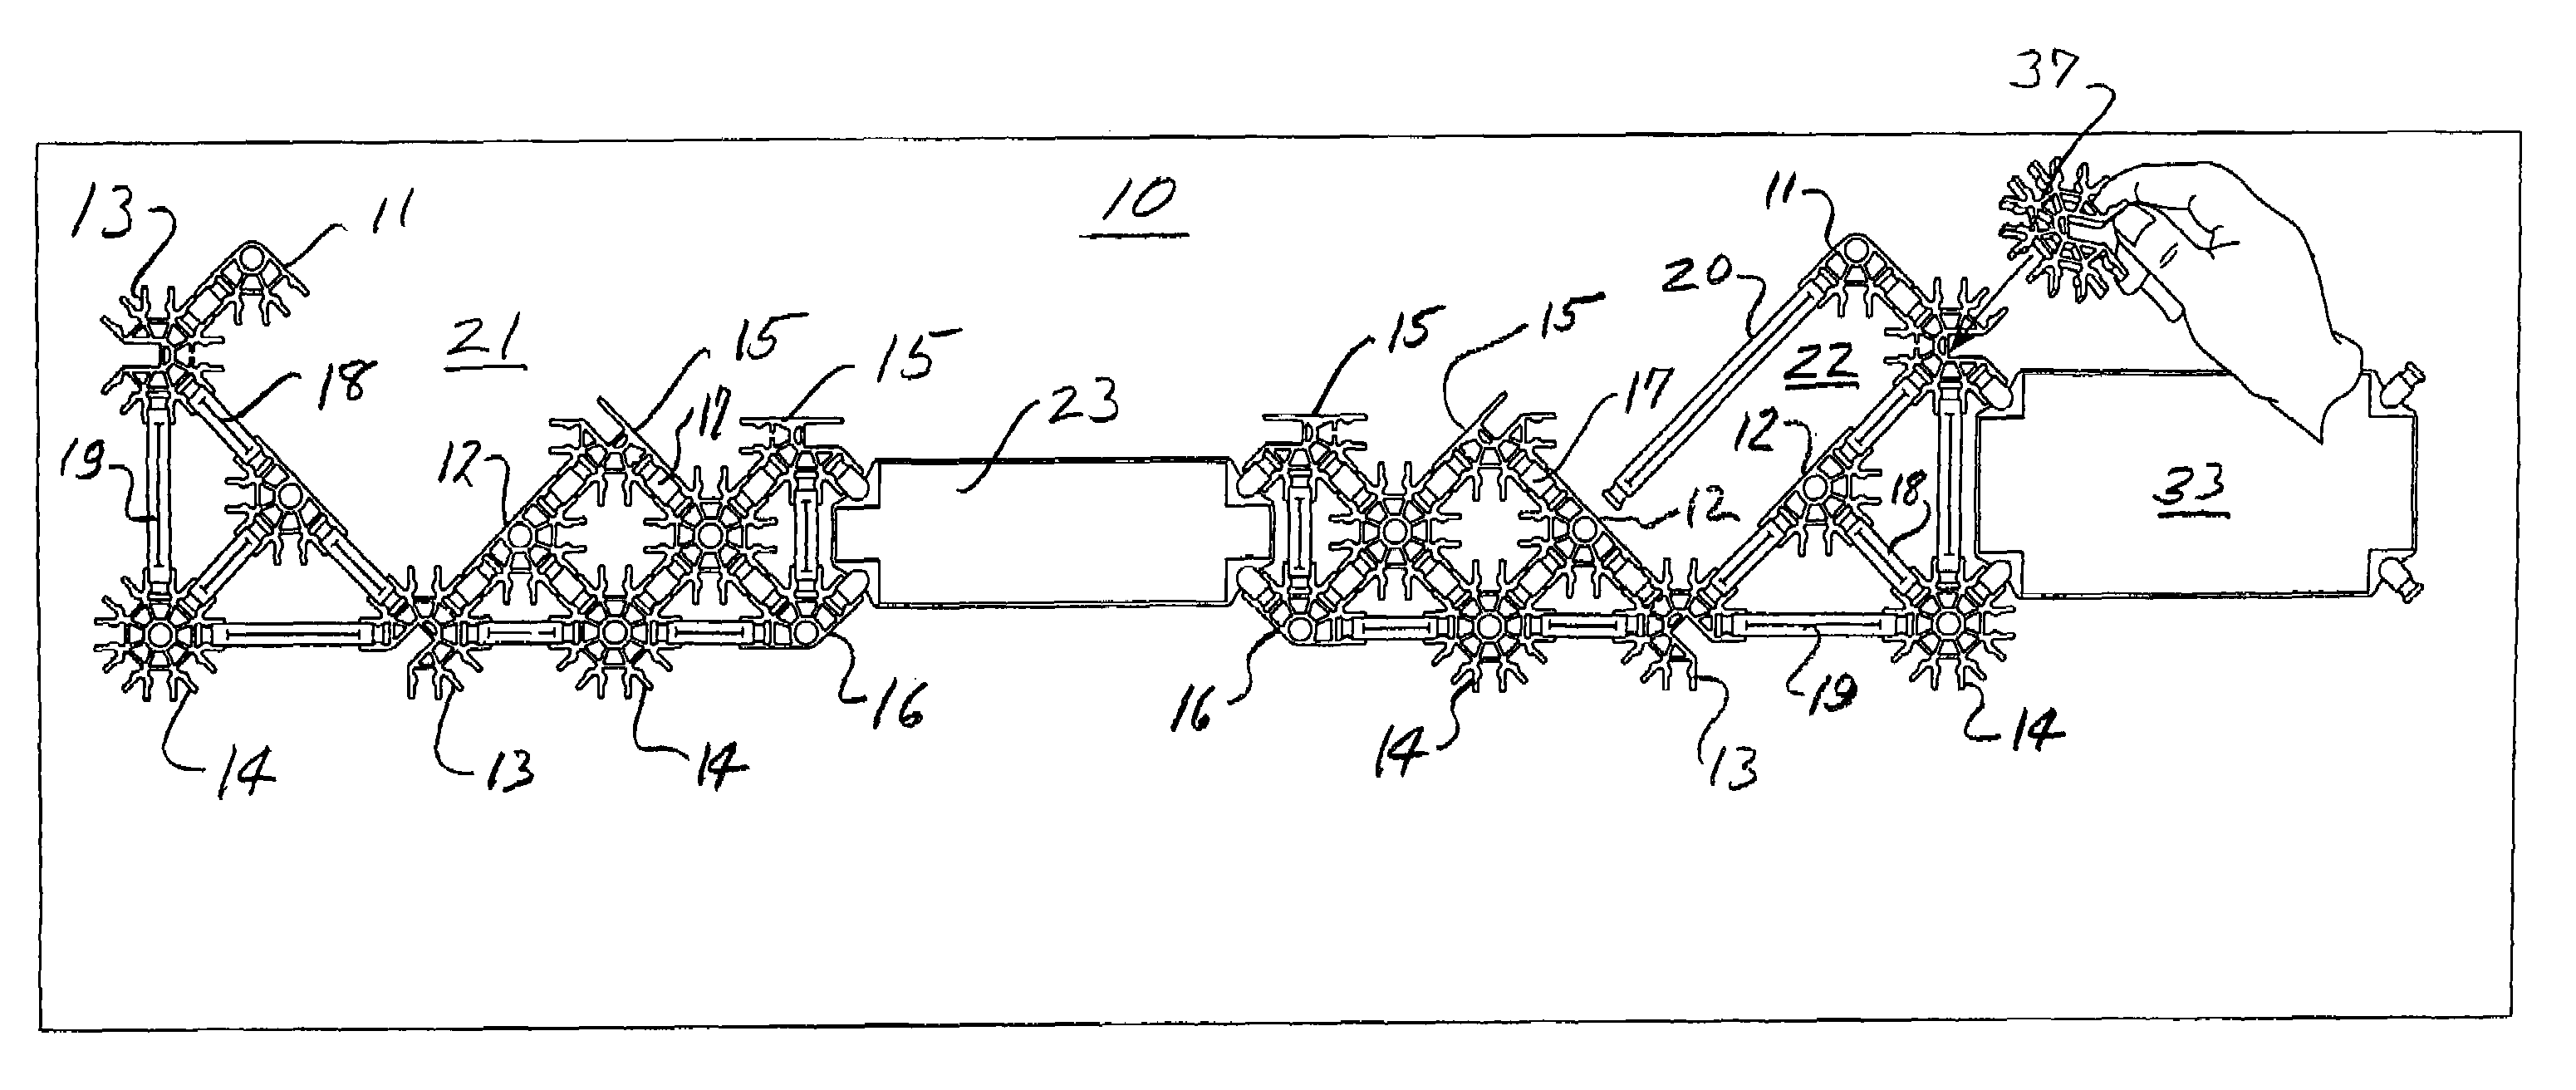 Method of constructing a three-dimensional structure with a multi-part construction toy set